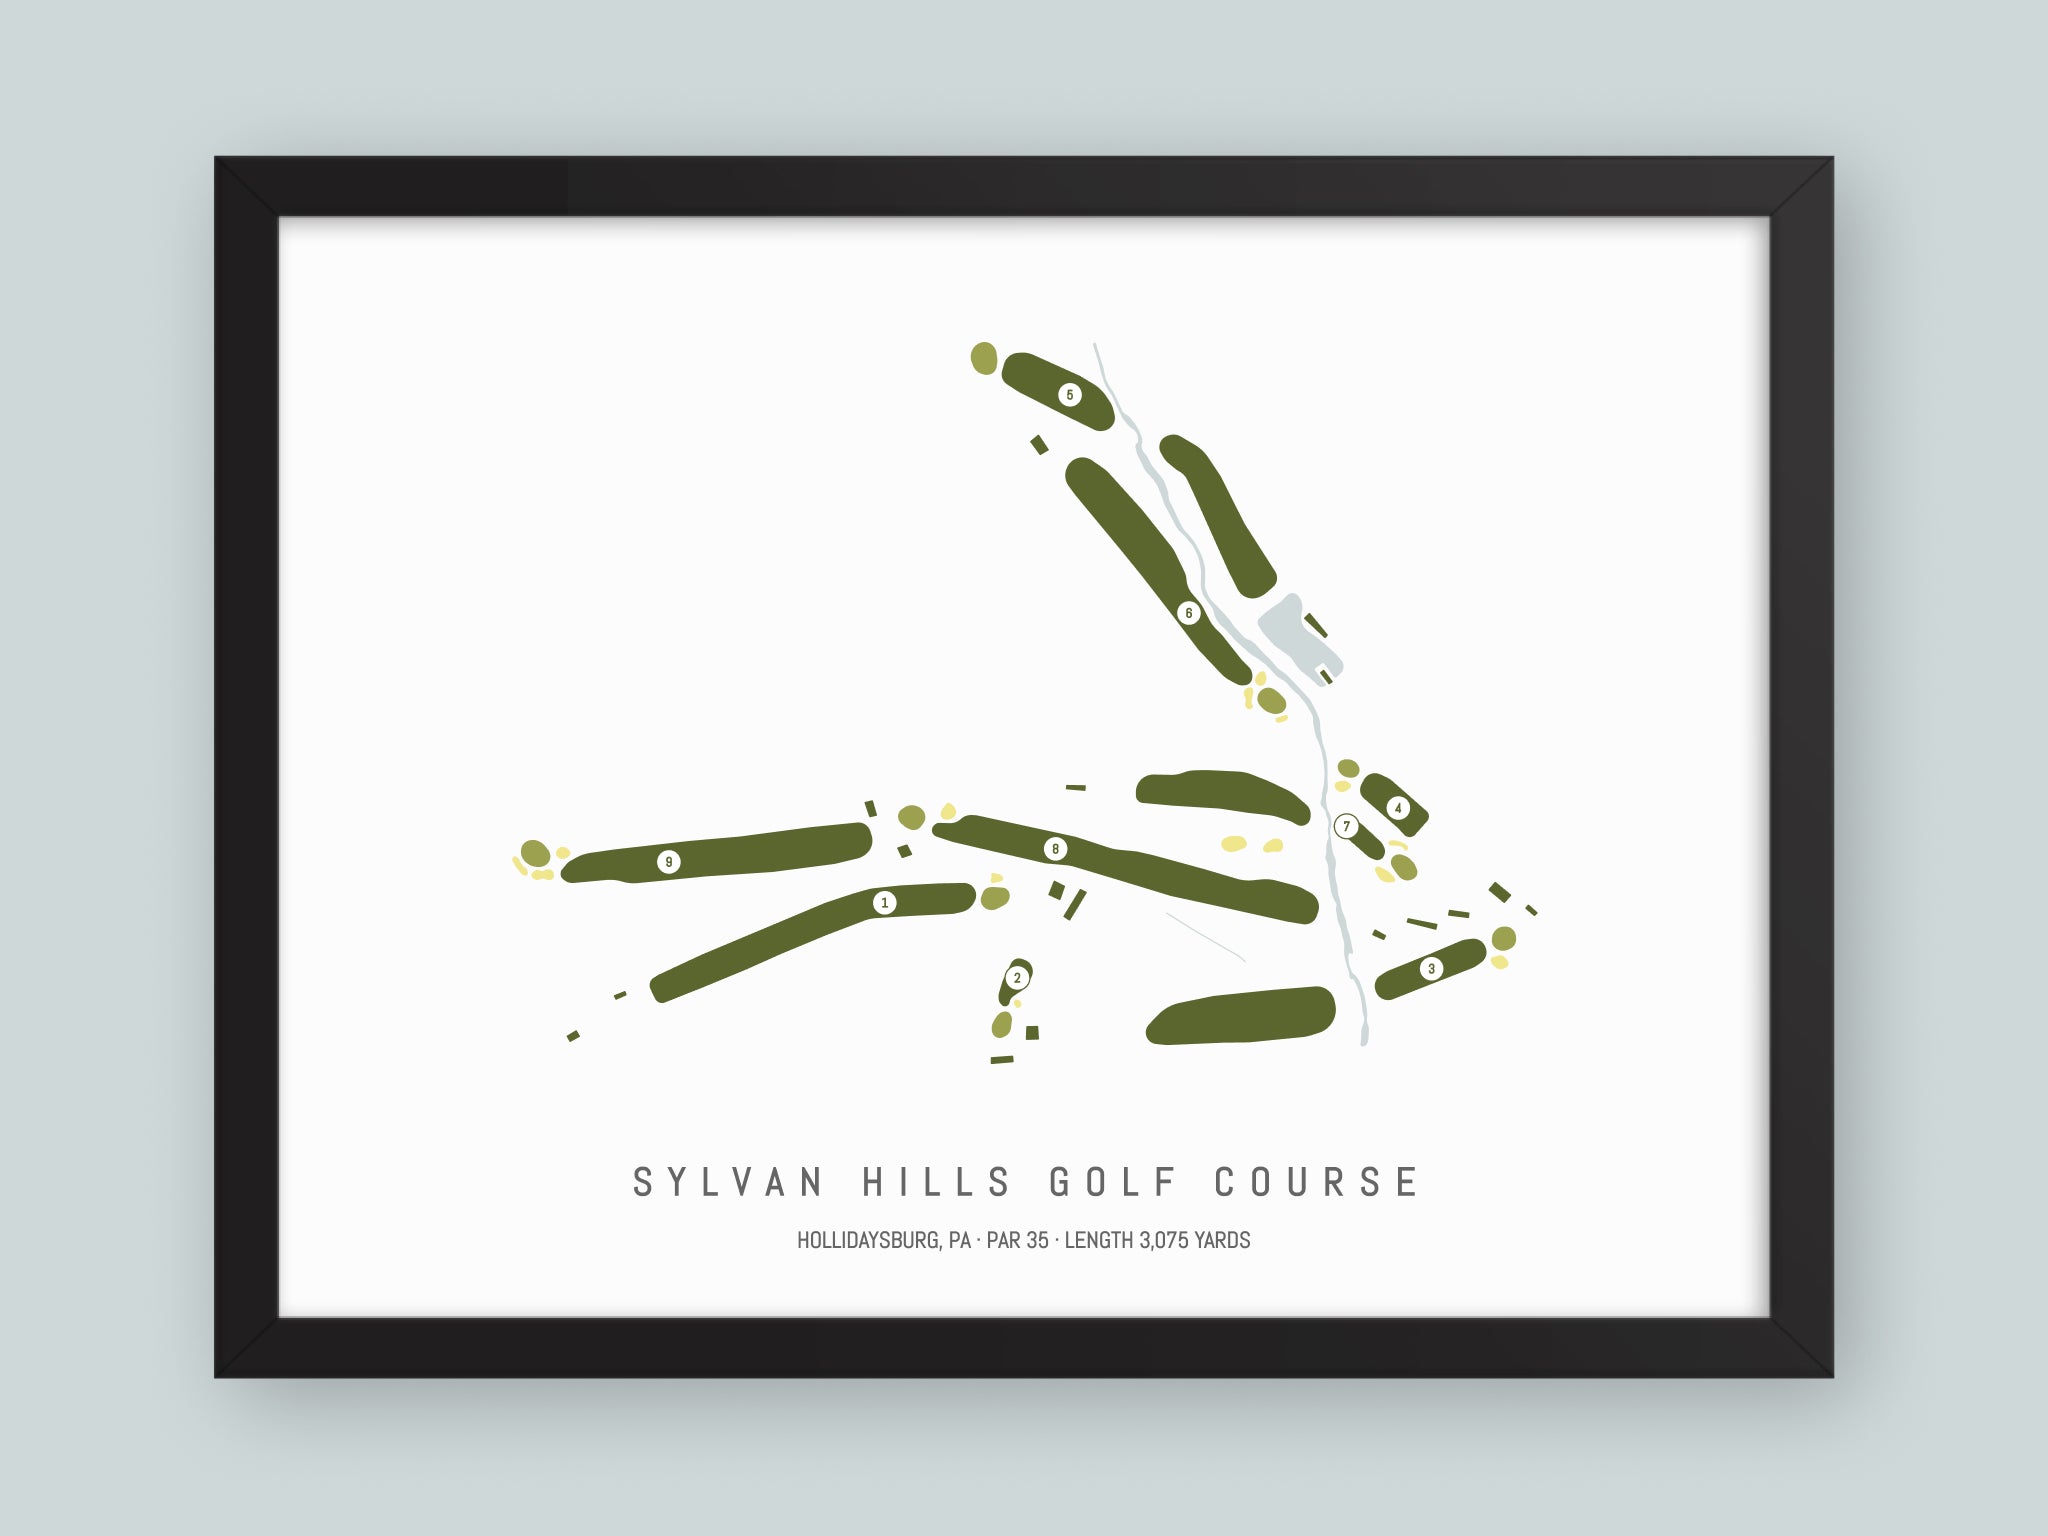 Sylvan-Hills-Golf-Club-PA--Black-Frame-24x18-With-Hole-Numbers